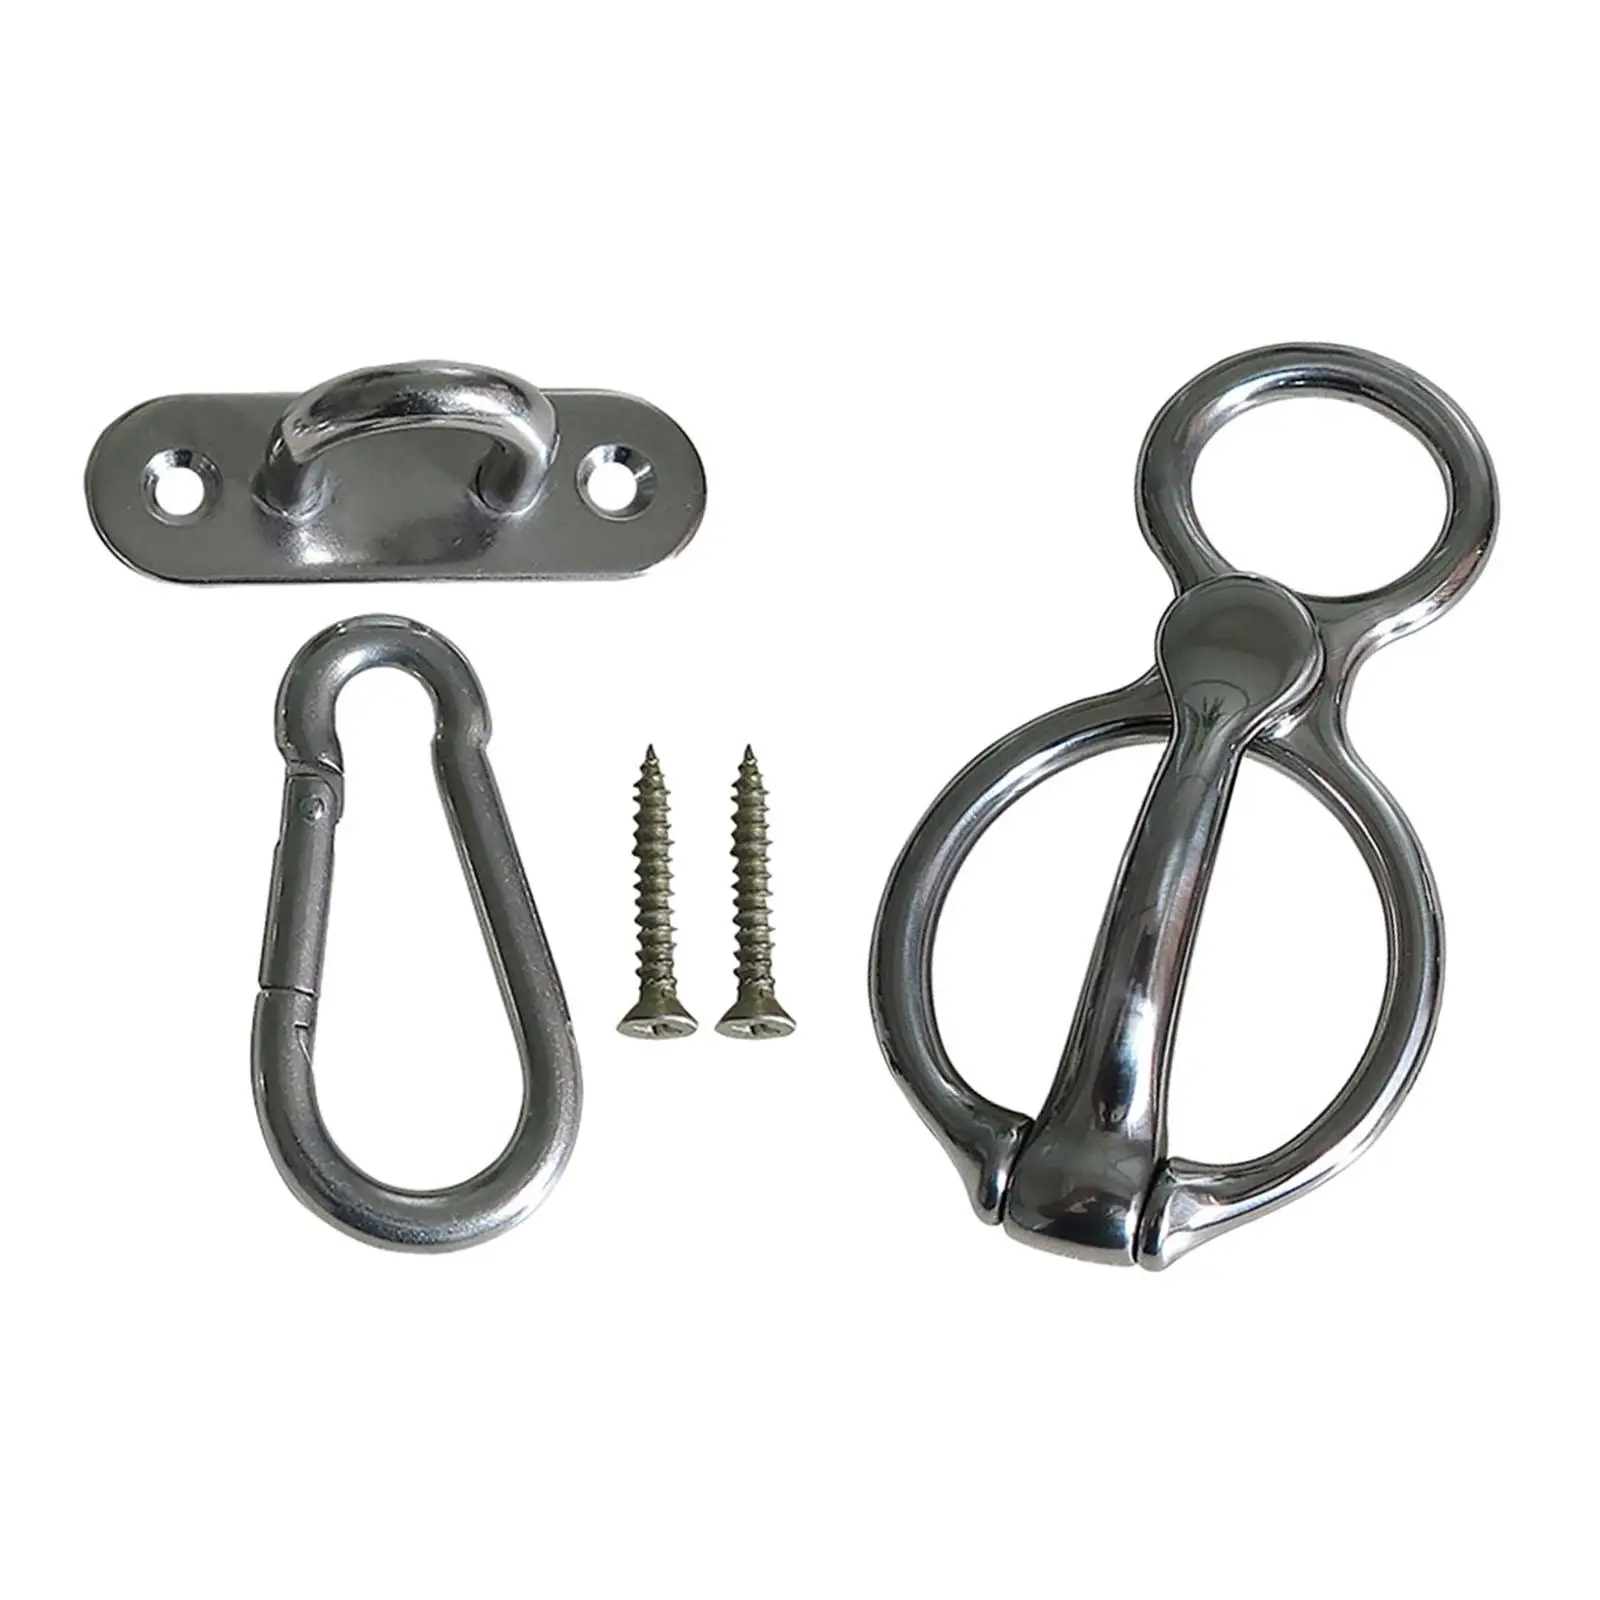 Horse Tie Ring Snap Outdoor Sports Stainless Steel Livestock Tie Off with Eye Bolt Safety Accessories Horse Tack Supplies